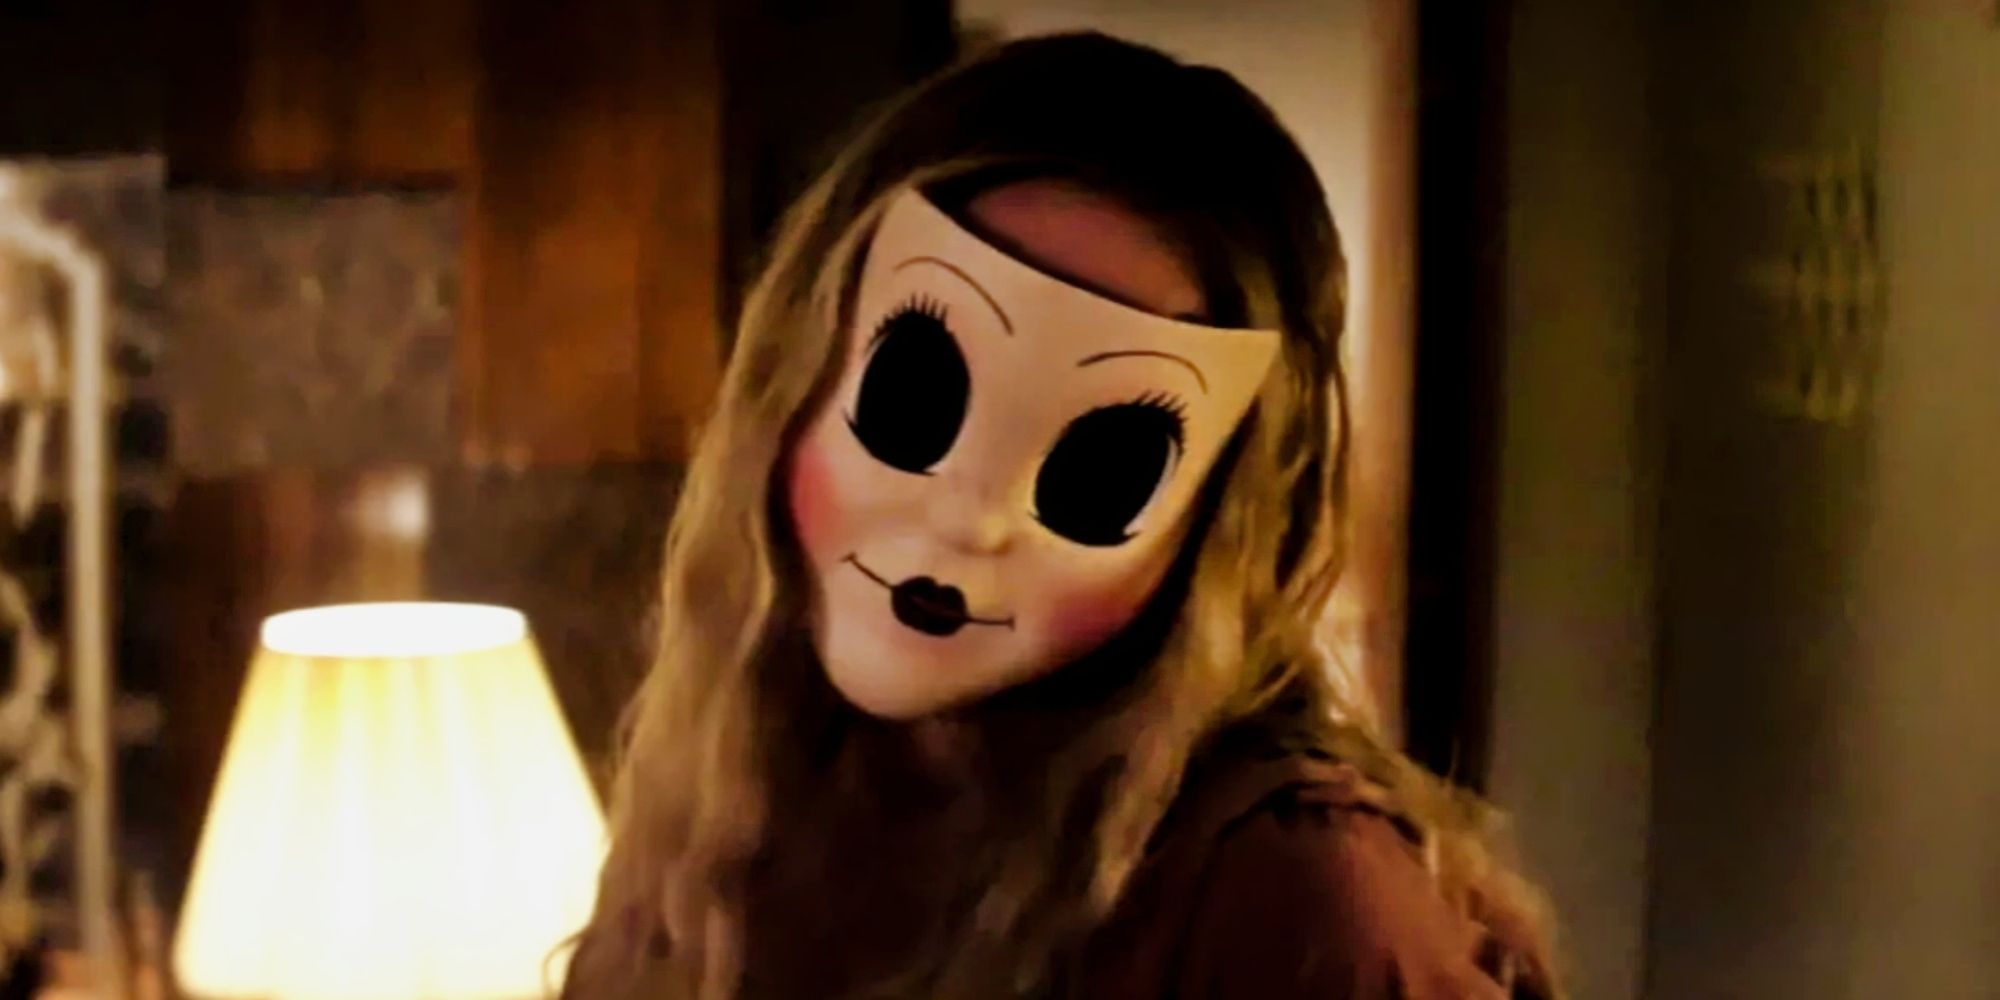 the strangers 2 dollface prey at night